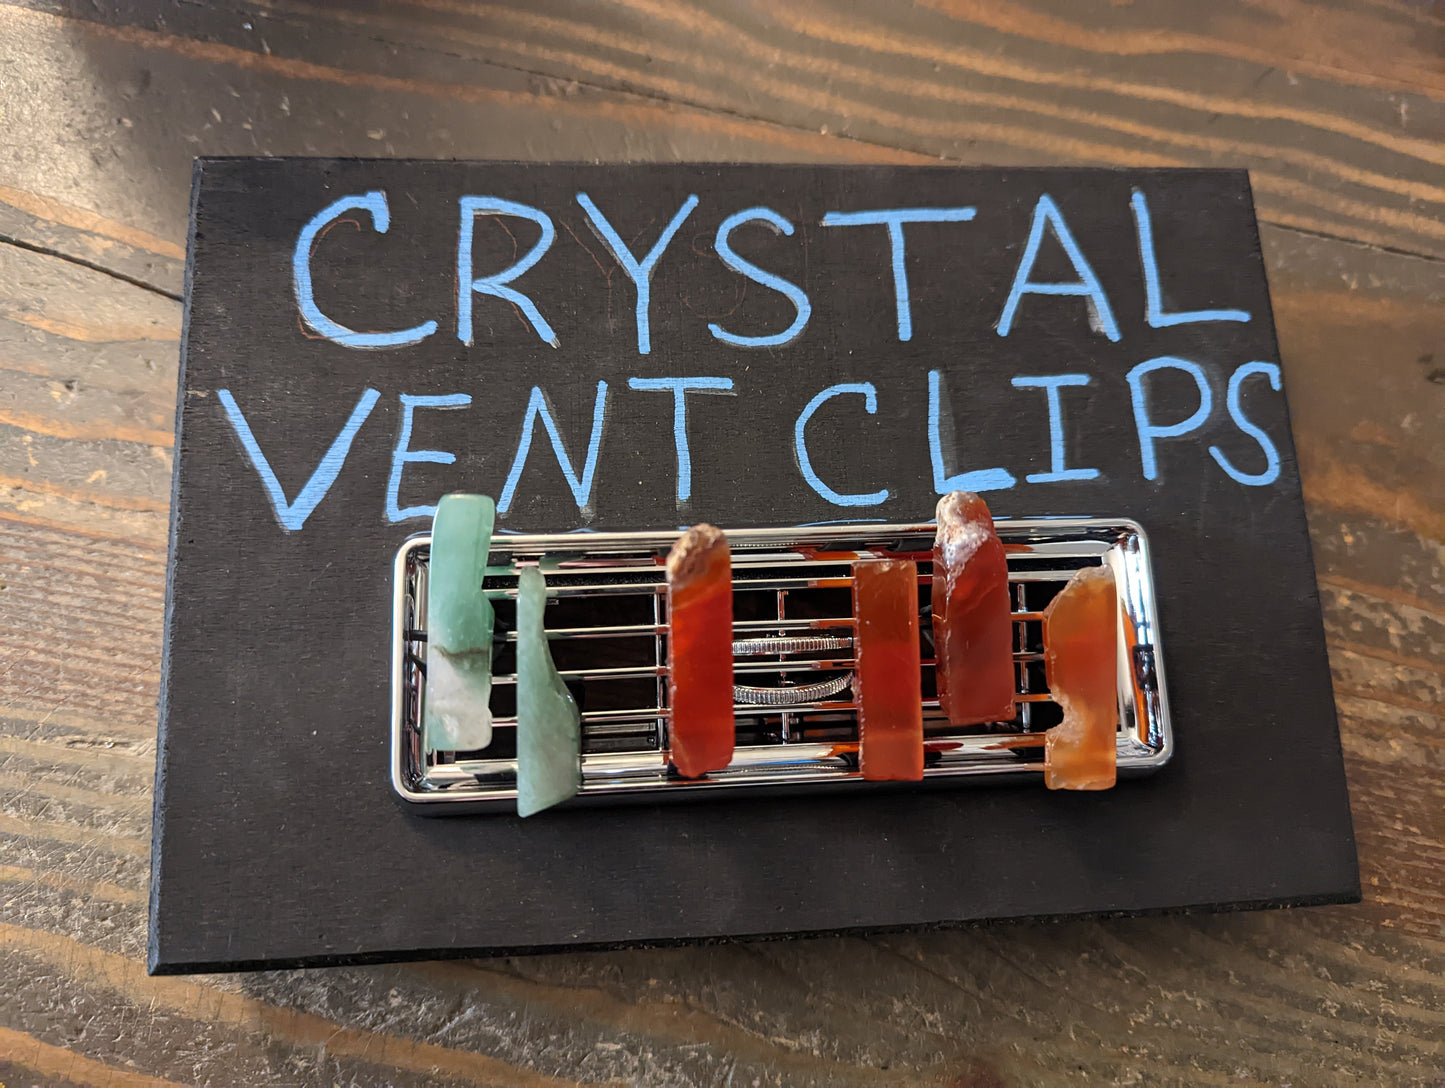 Assorted Mix Crystal 4 Car-ma Vent Clips